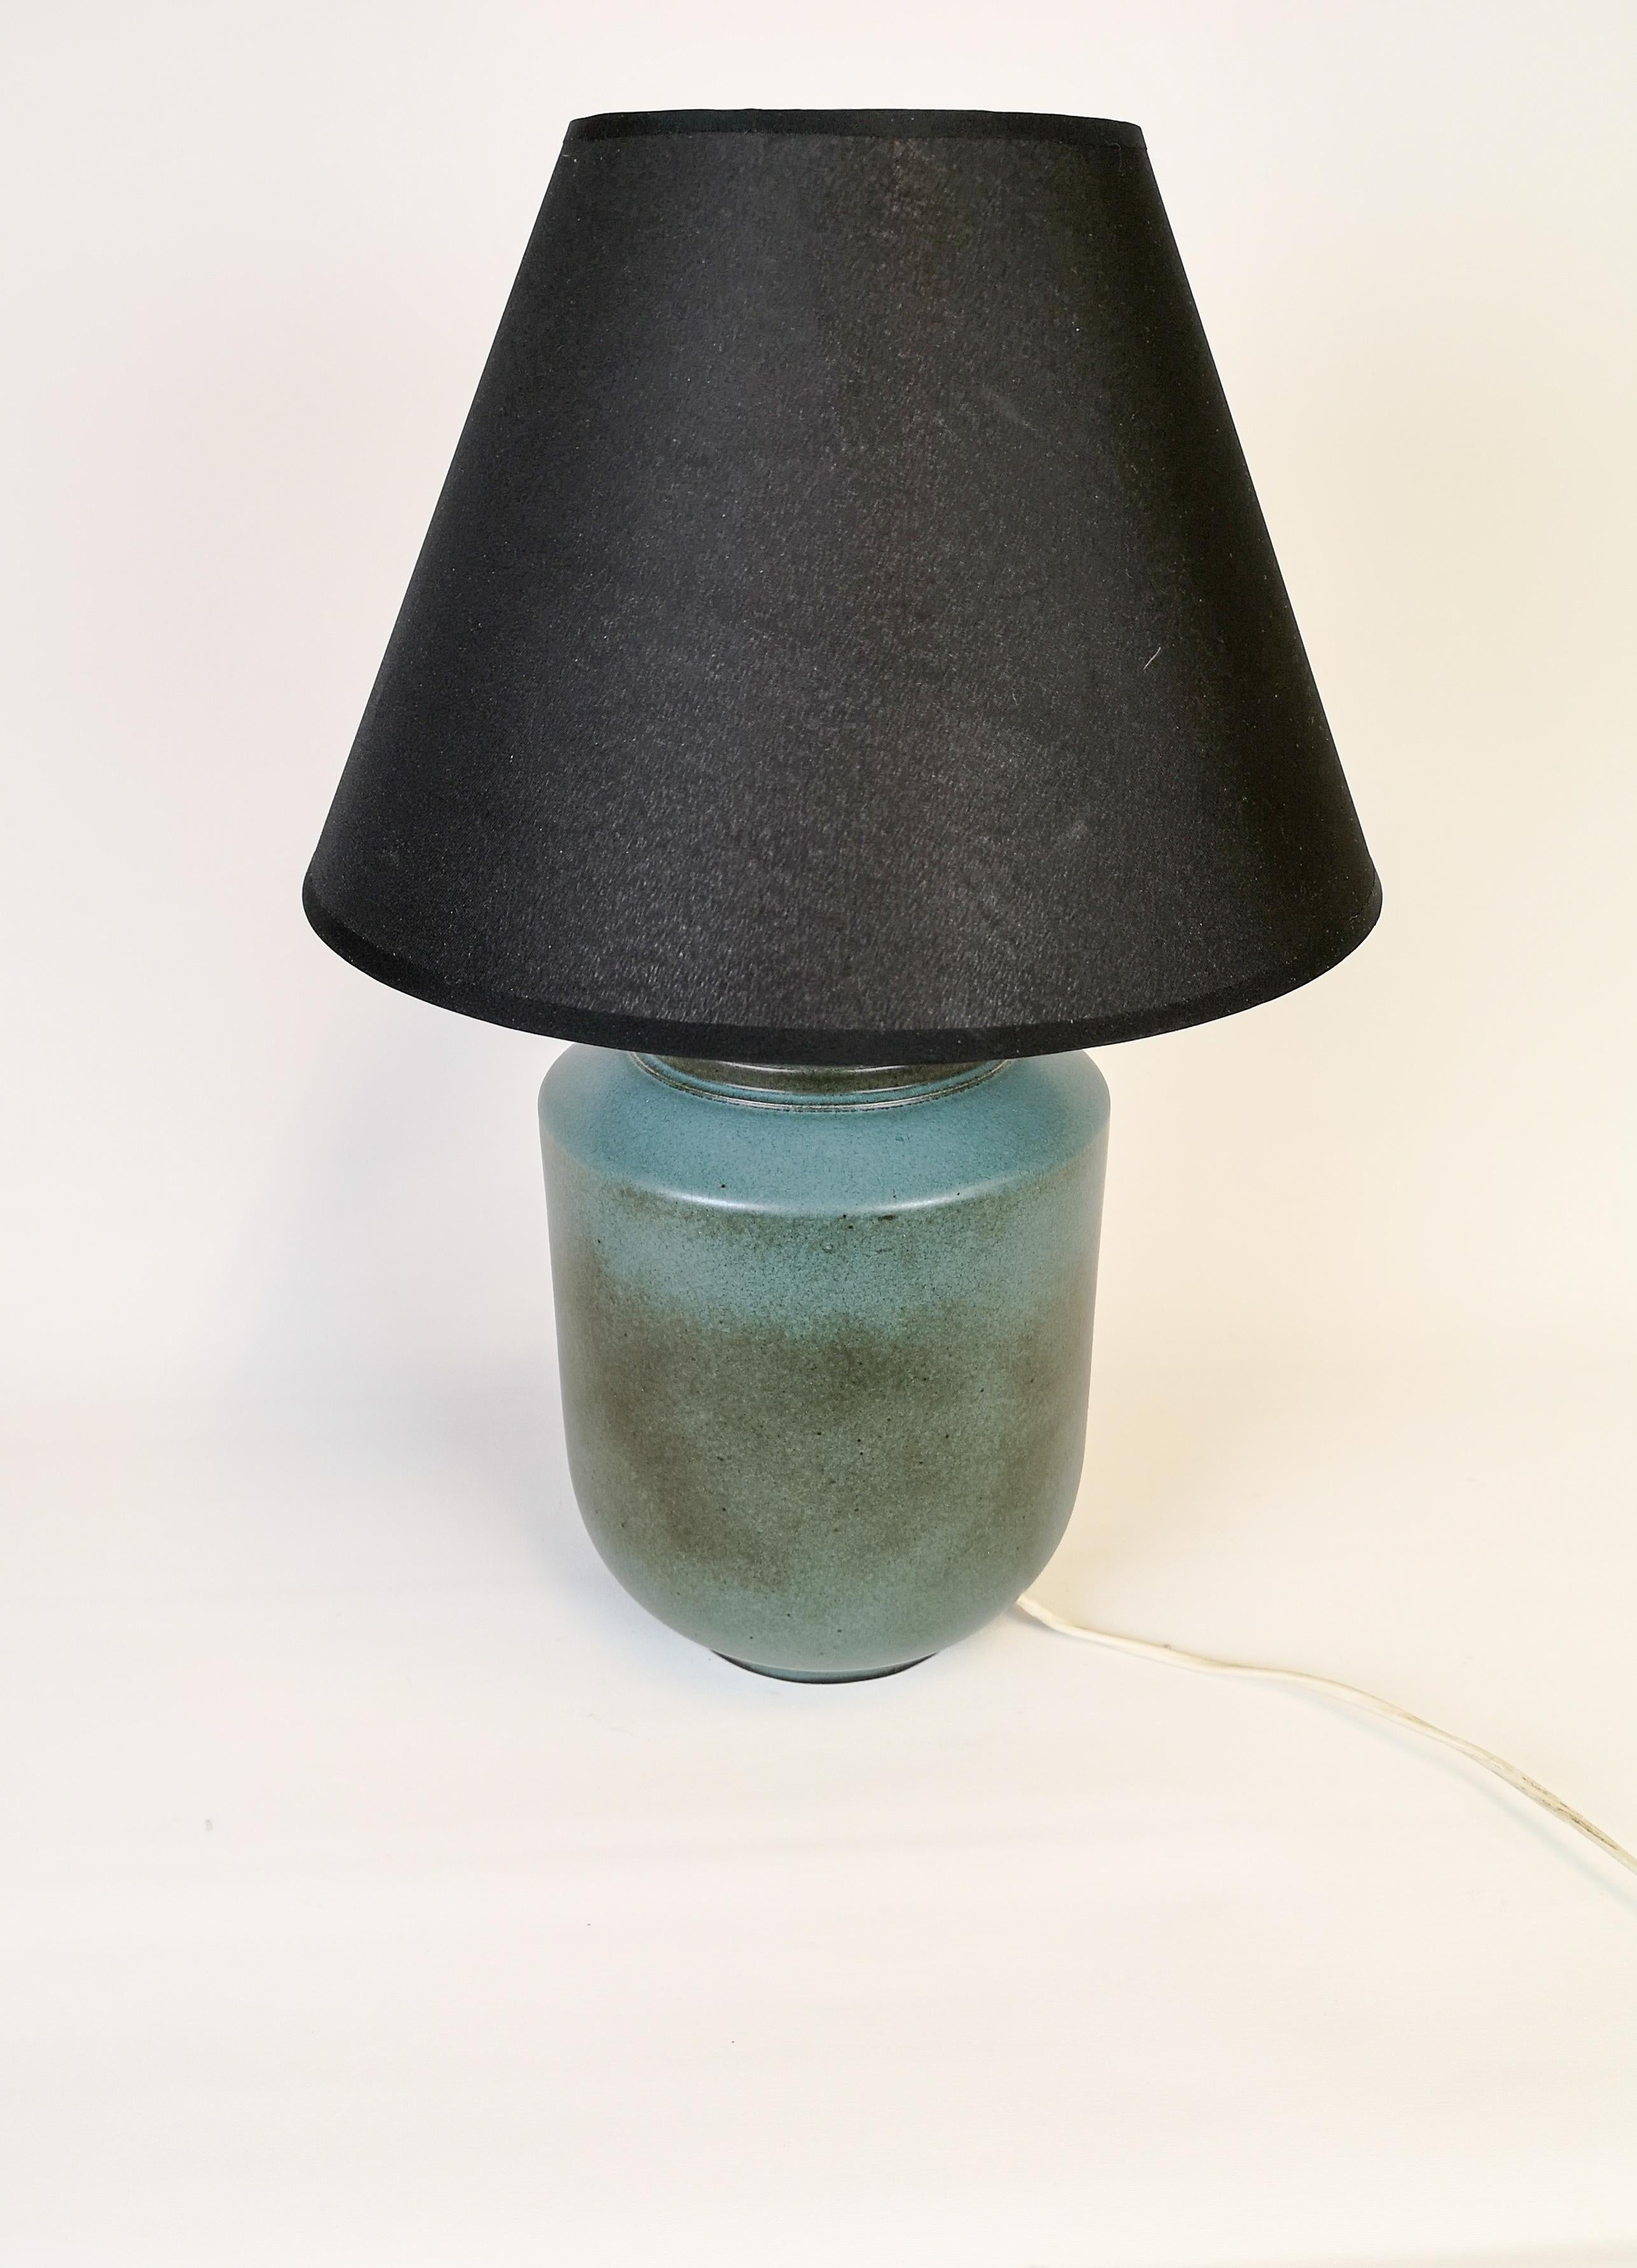 Ceramic table lamp by Gunnar Nylund for Rörstrand, Sweden. The colors of the glaze have a very nice look. This ceramic lamp piece is a rare one to find. 

Good working condition.

Measures: H 30 cm with shade 40 cm D 18 cm.